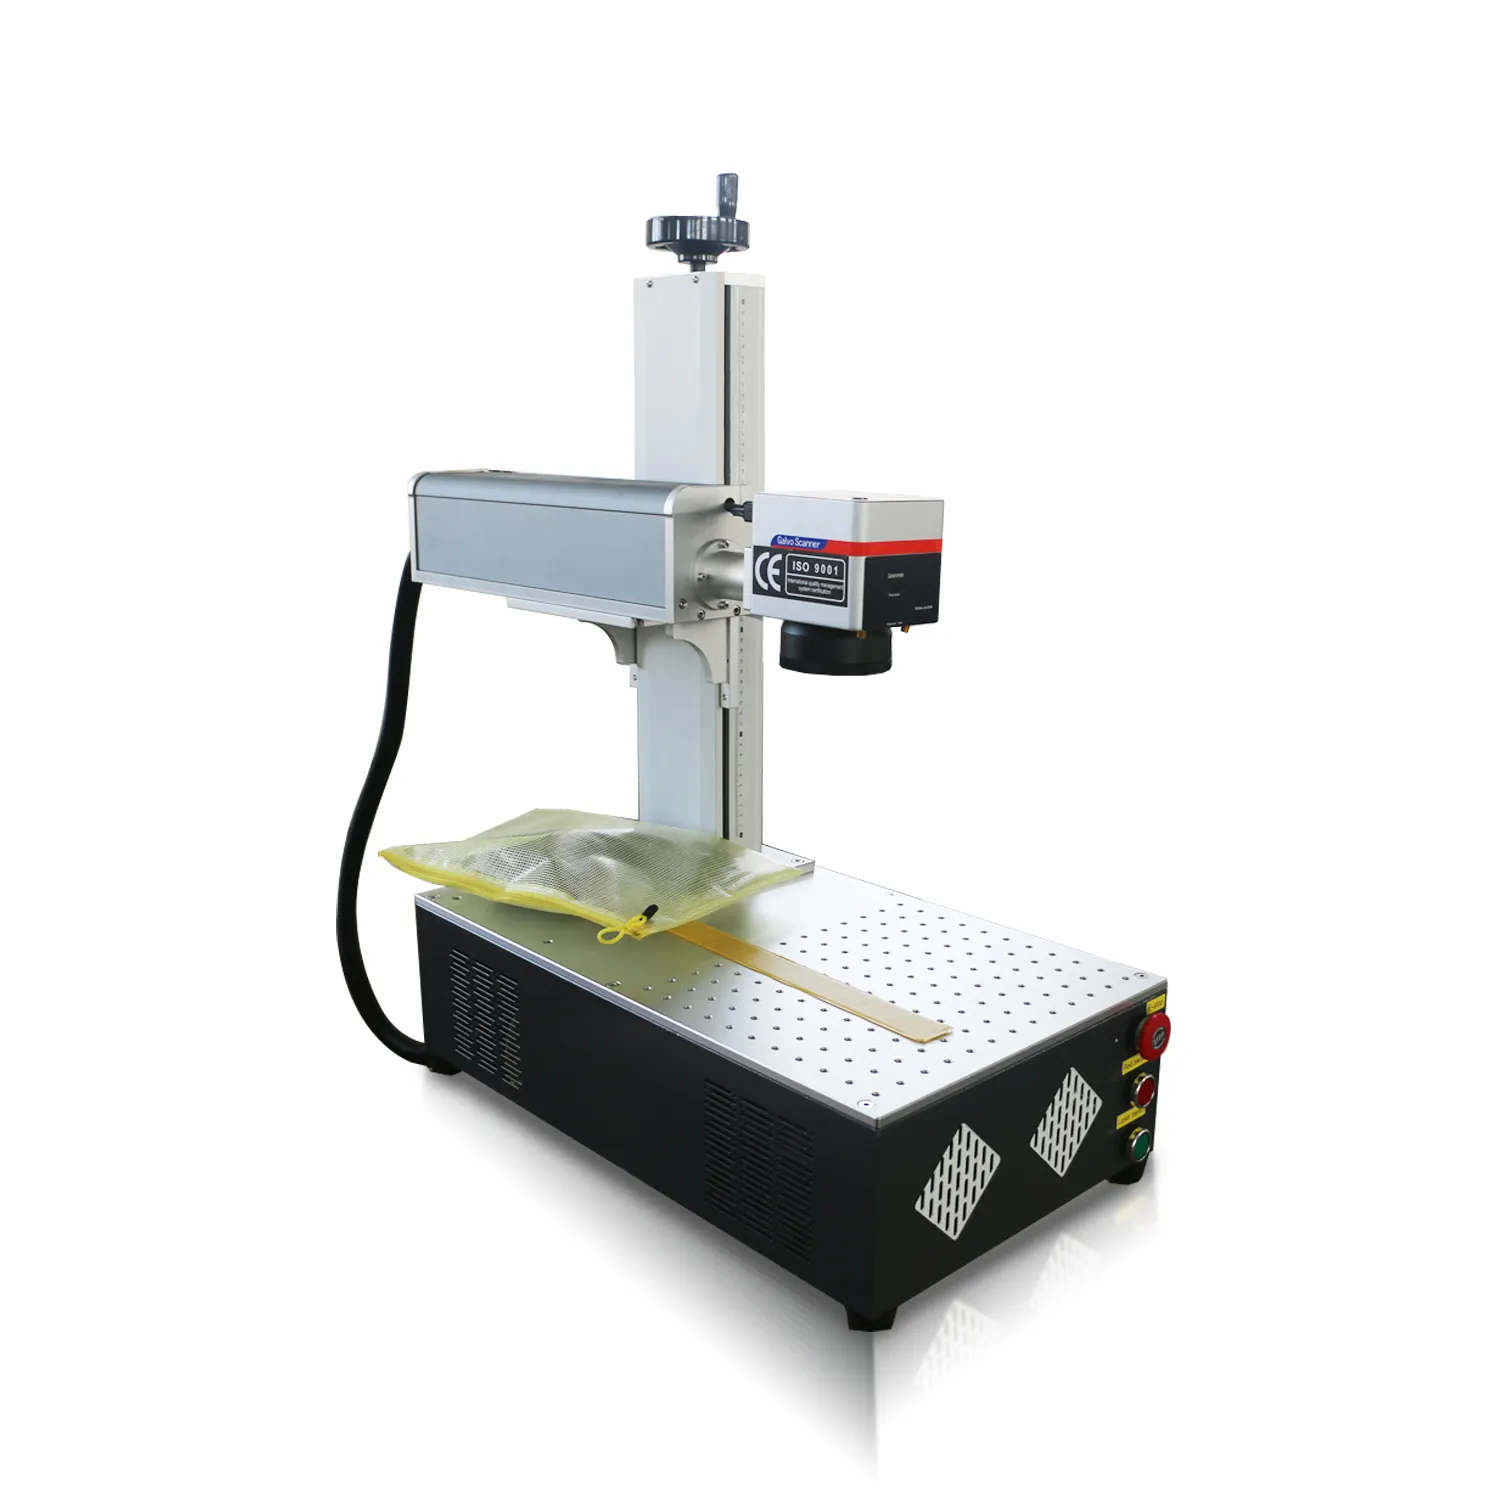 20W Raycus Fiber Laser Marking Machine Price in Pakistan with 200*200mm Size EZCAD Control Lightburn Software Rotatory for Ring